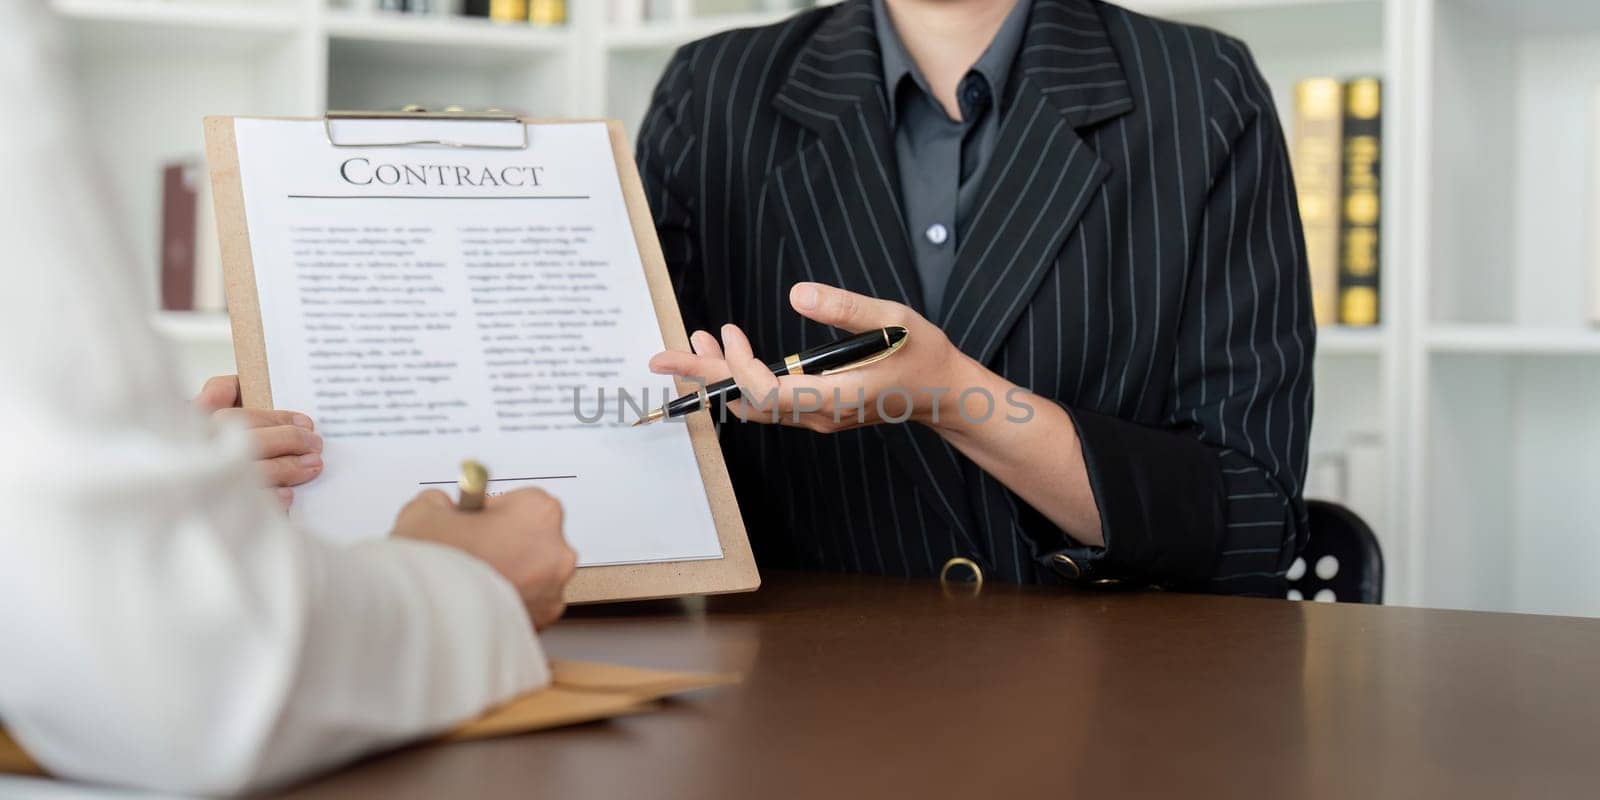 Lawyer office the company hired the lawyer office a legal advisor and draft the contract so that the client could signs contract. Contract of sale was on the table in the lawyer office.